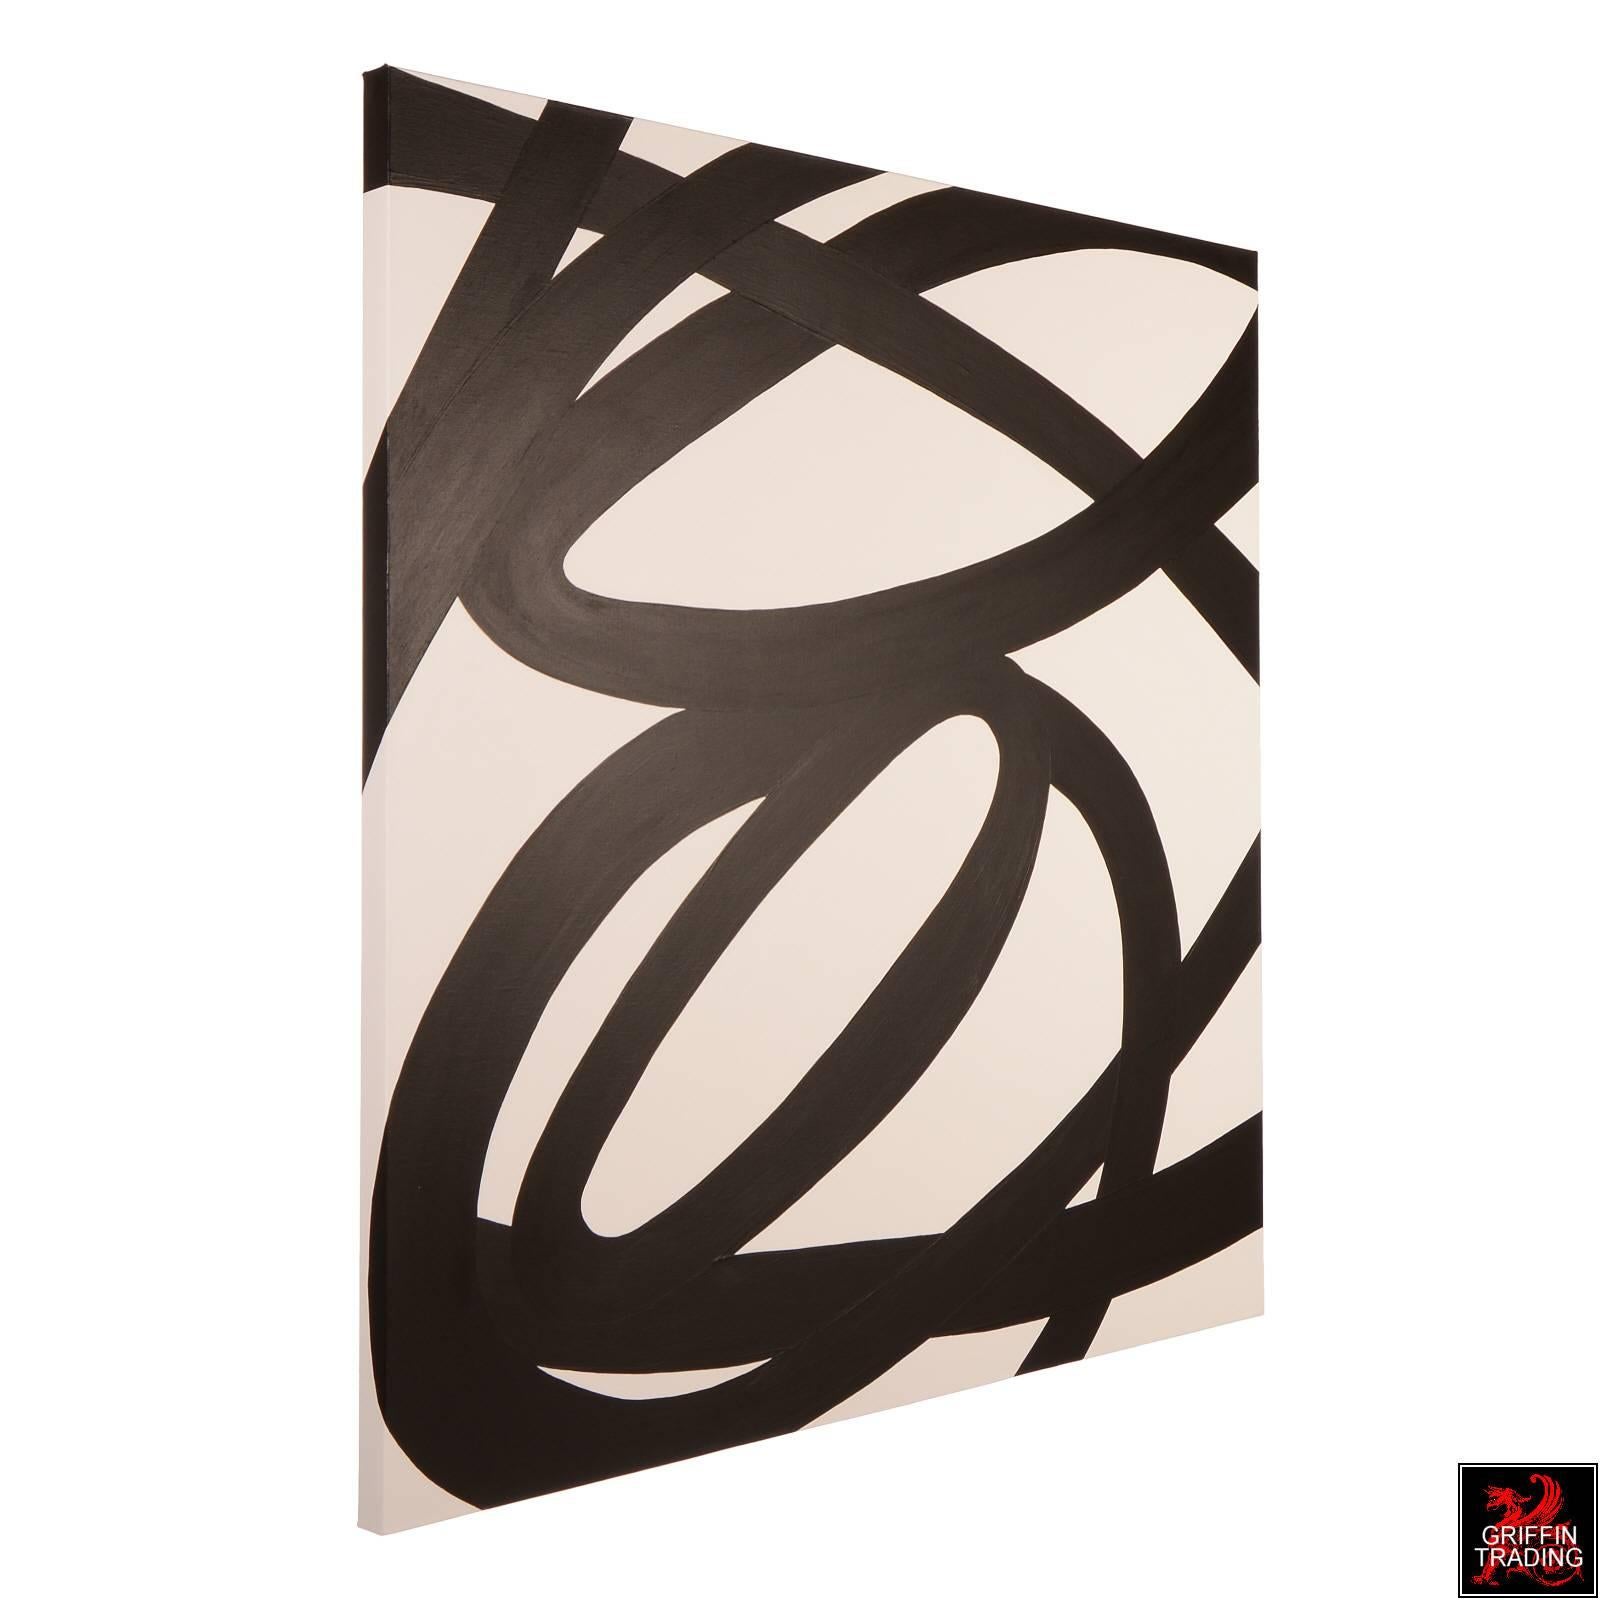 INTERCHANGE is an abstract painting consisting of intertwined lines of matte black against a white canvas background. Its striking appearance makes a statement in any room. The painting is on a gallery wrapped canvas with painted edge, so there is